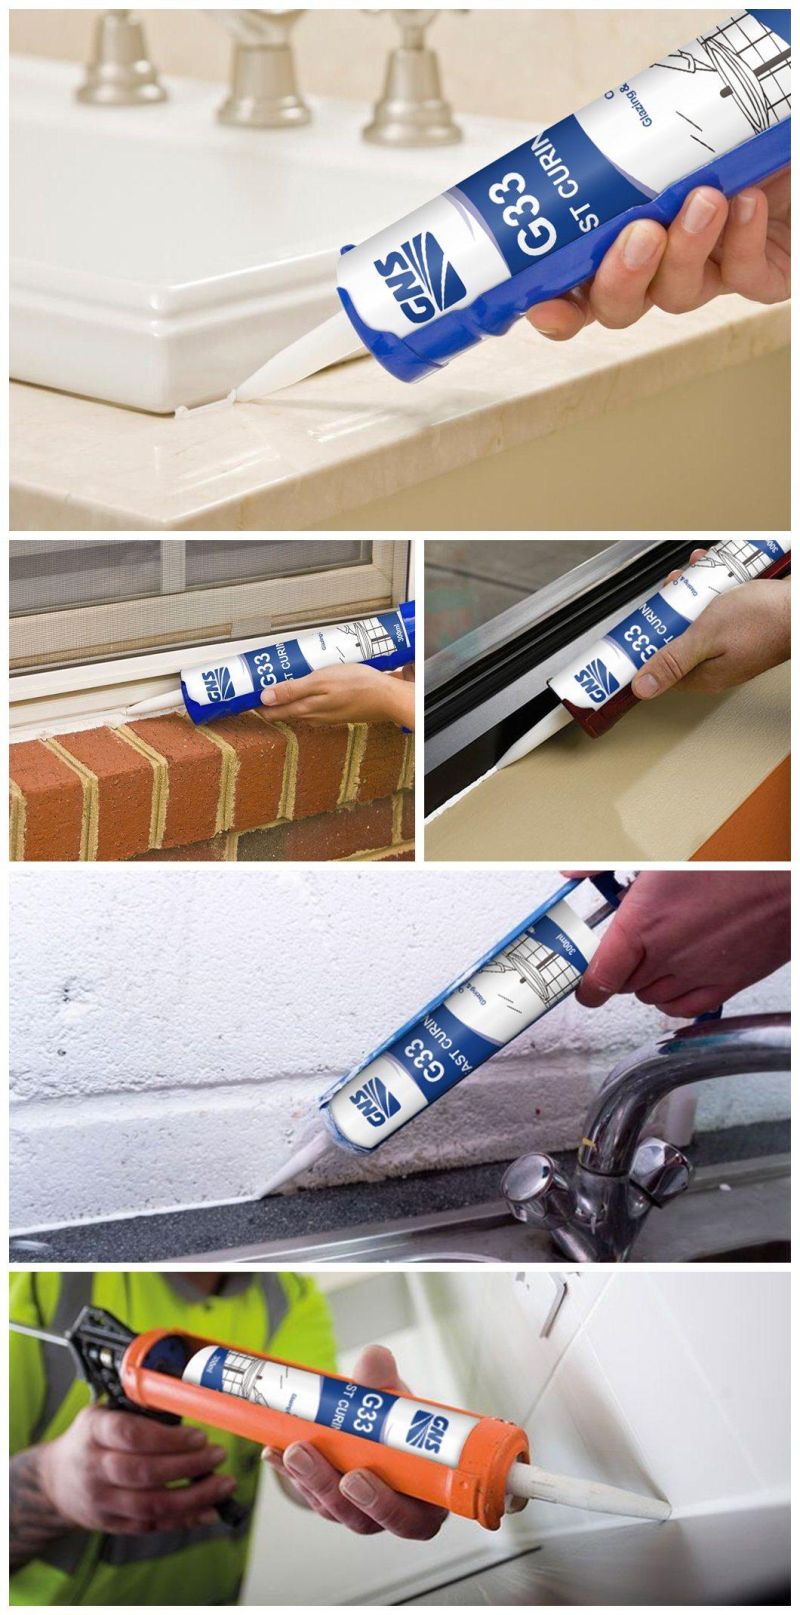 Acetoxy Cure One Part RTV Silicone Sealant Which Applied on Glass, Ceramics Vitreous Enamels. Shelves, Counter Cabinets